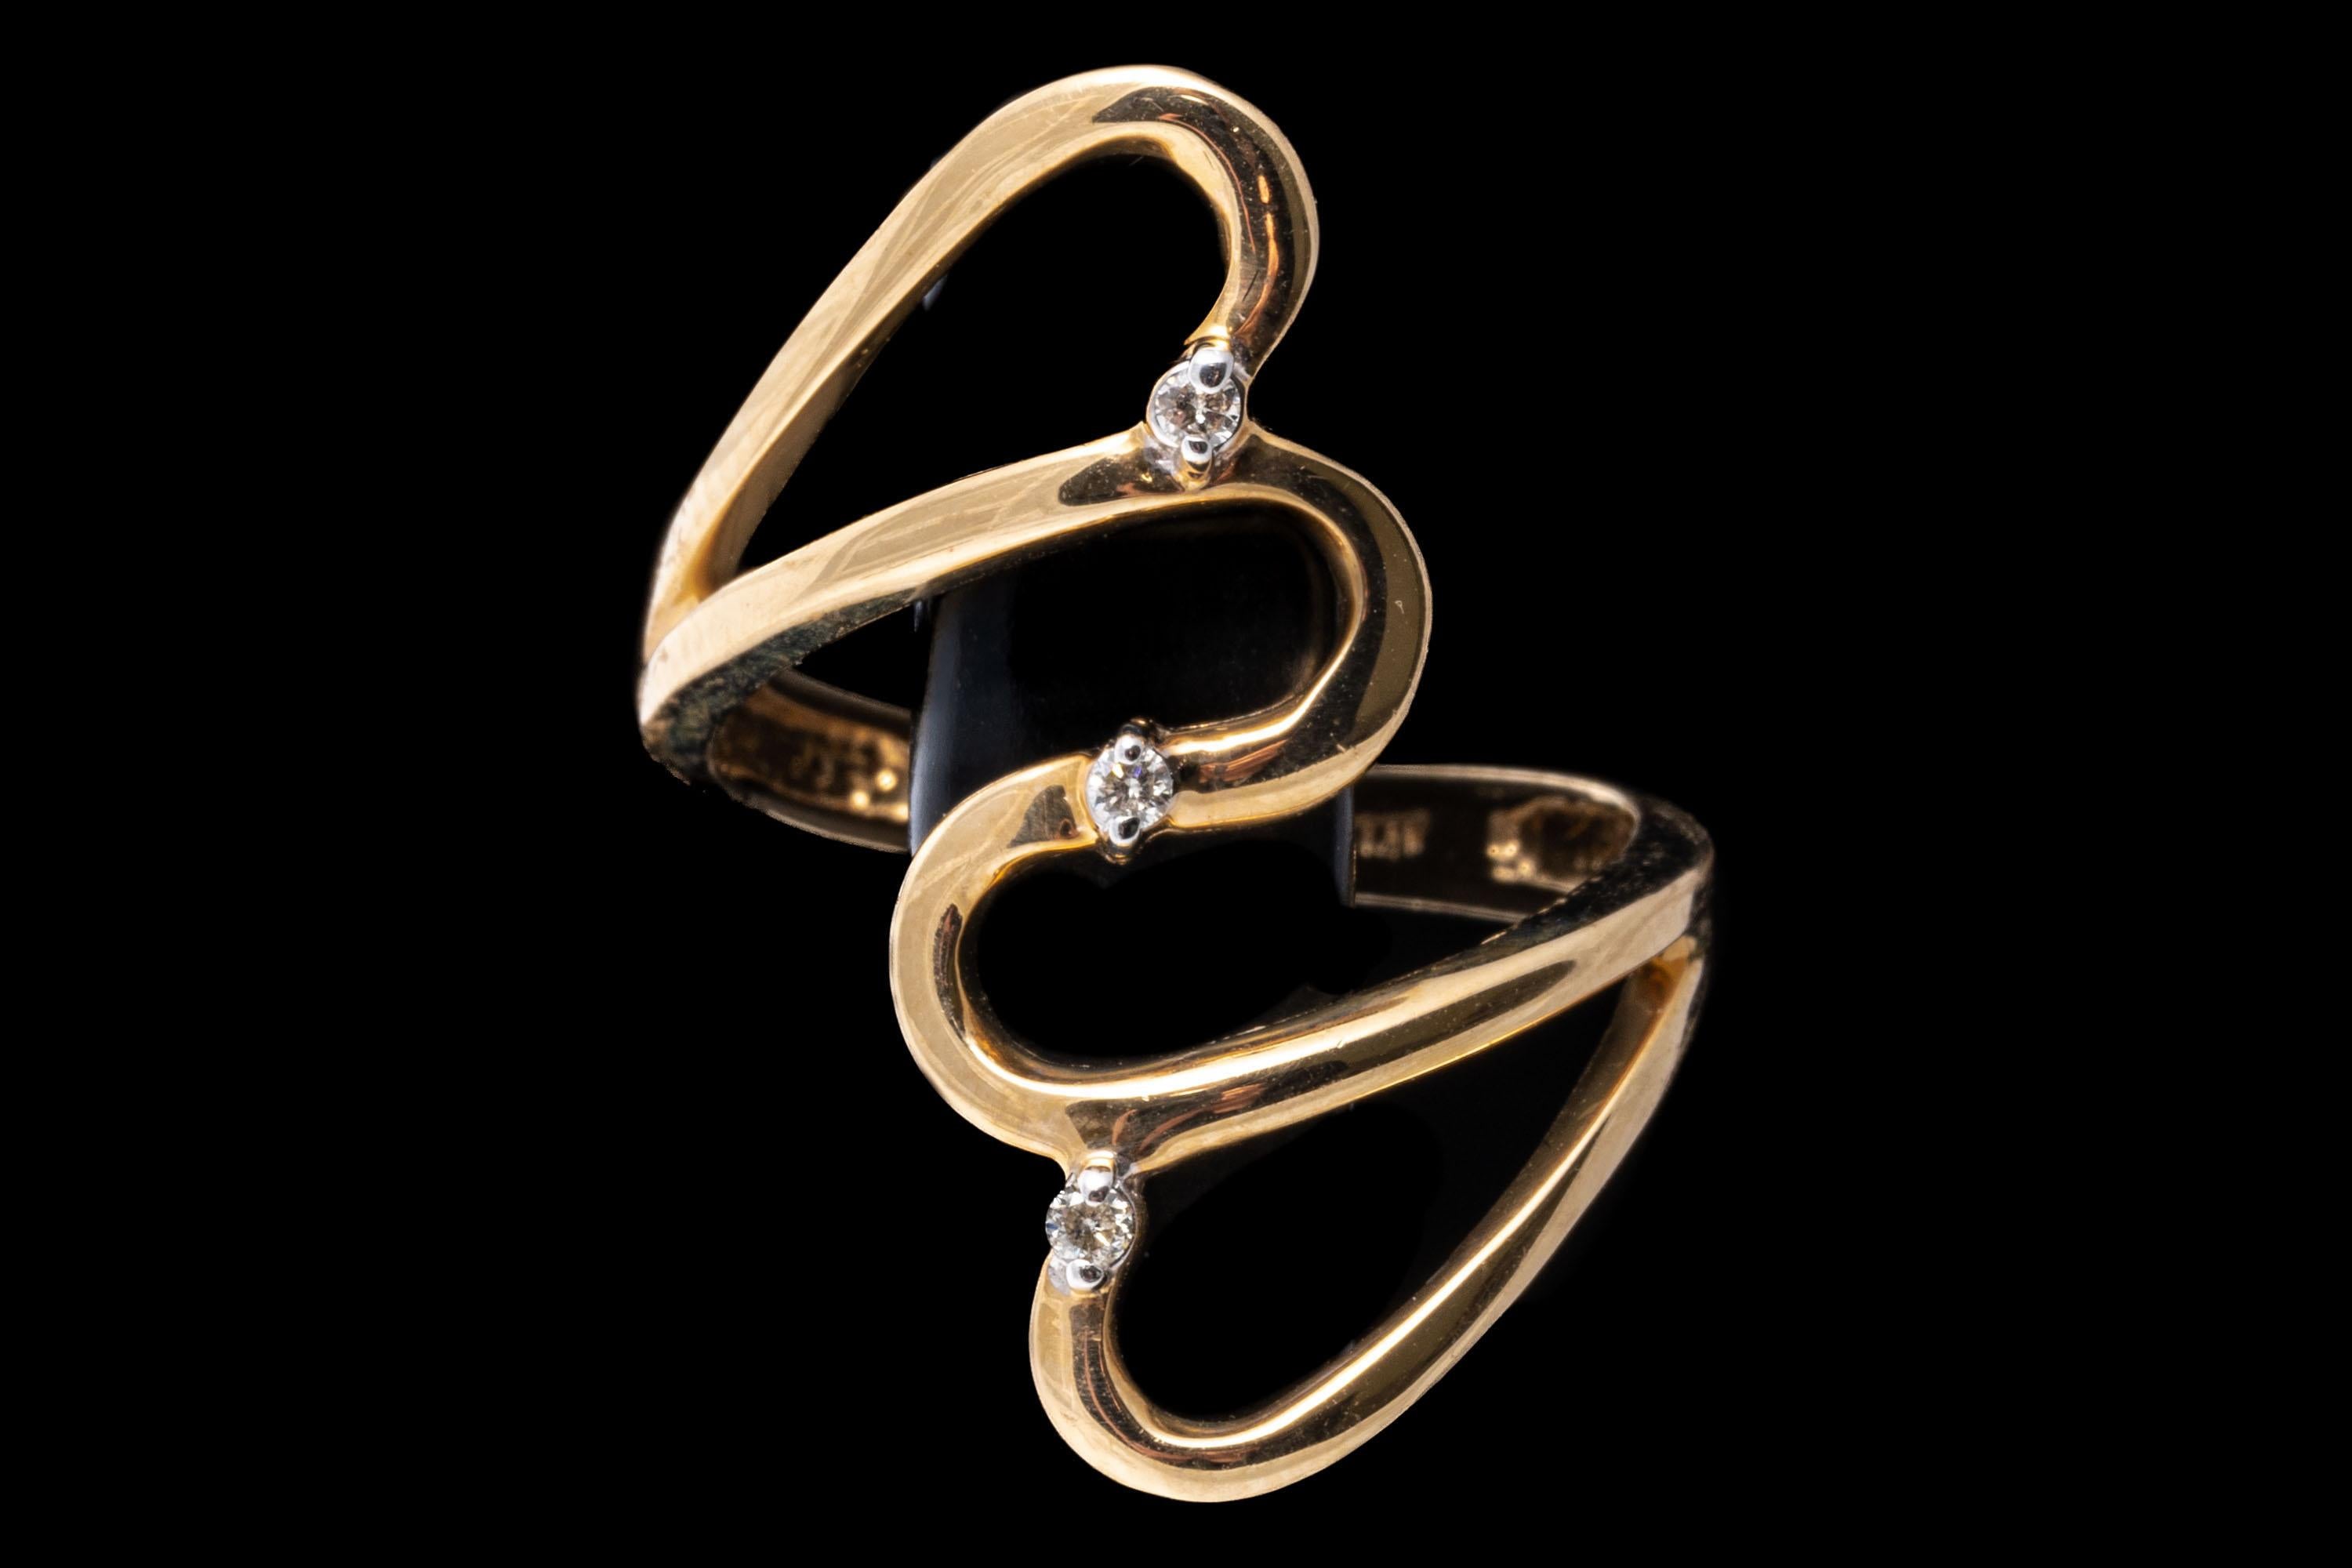 14k yellow gold ring. This yellow gold, elongated bypass style ring is high polished finished, punctuated by opposing open hearts and finished with round faceted, accent diamonds, approximately 0.03 TCW, prong set.
Marks: 14k
Dimensions: 1/2